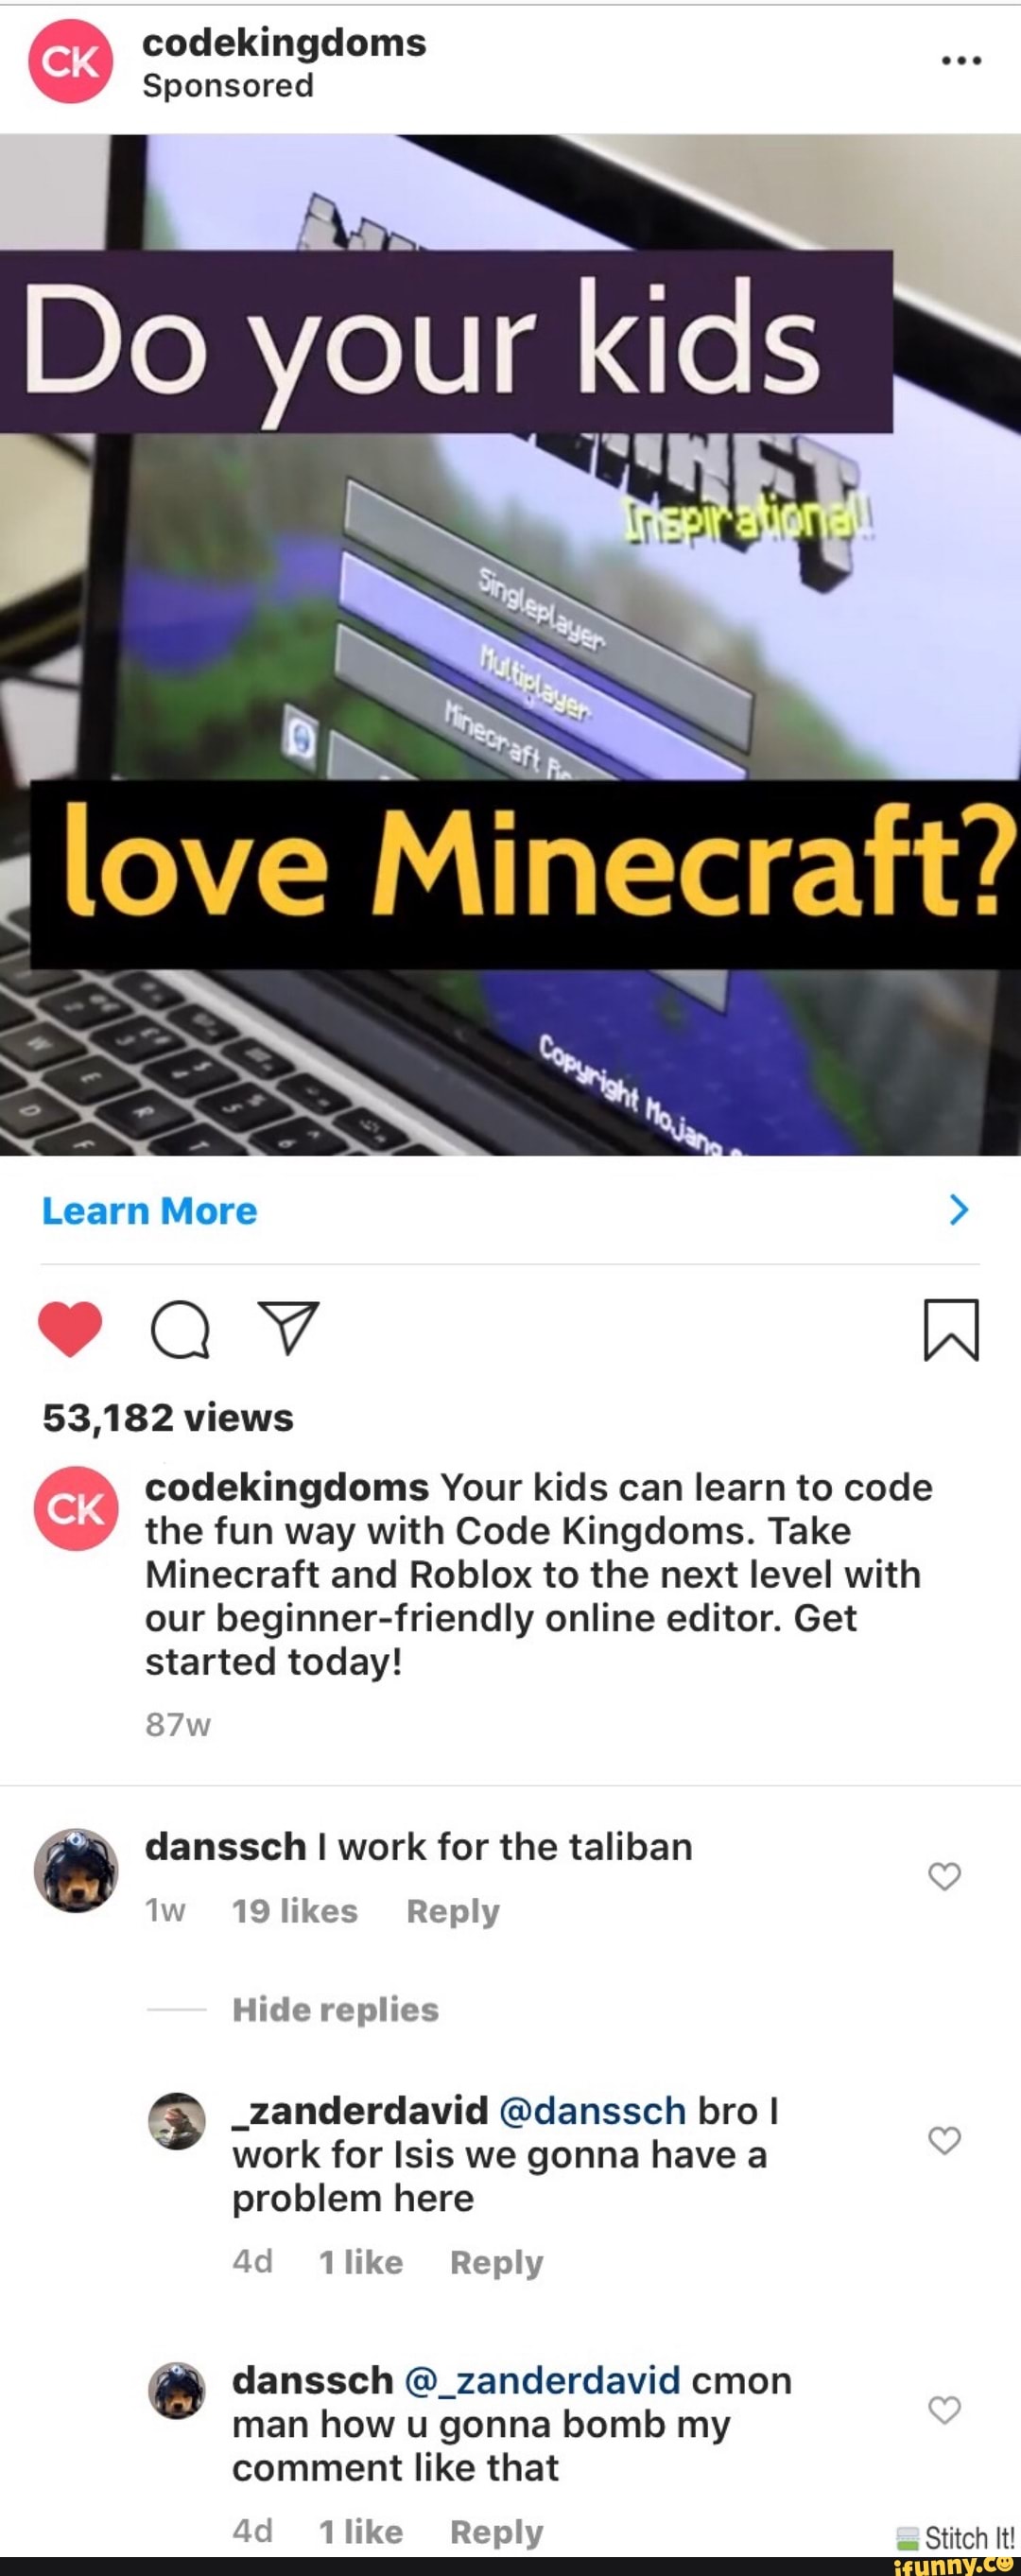 Wee Sponsored Q Codekingdoms Your Kids Can Learn To Code The Fun Way With Code Kingdoms Take Minecraft And Roblox To The Next Level With Our Beginner Friendly Online Editor Get Started Today - the next level roblox